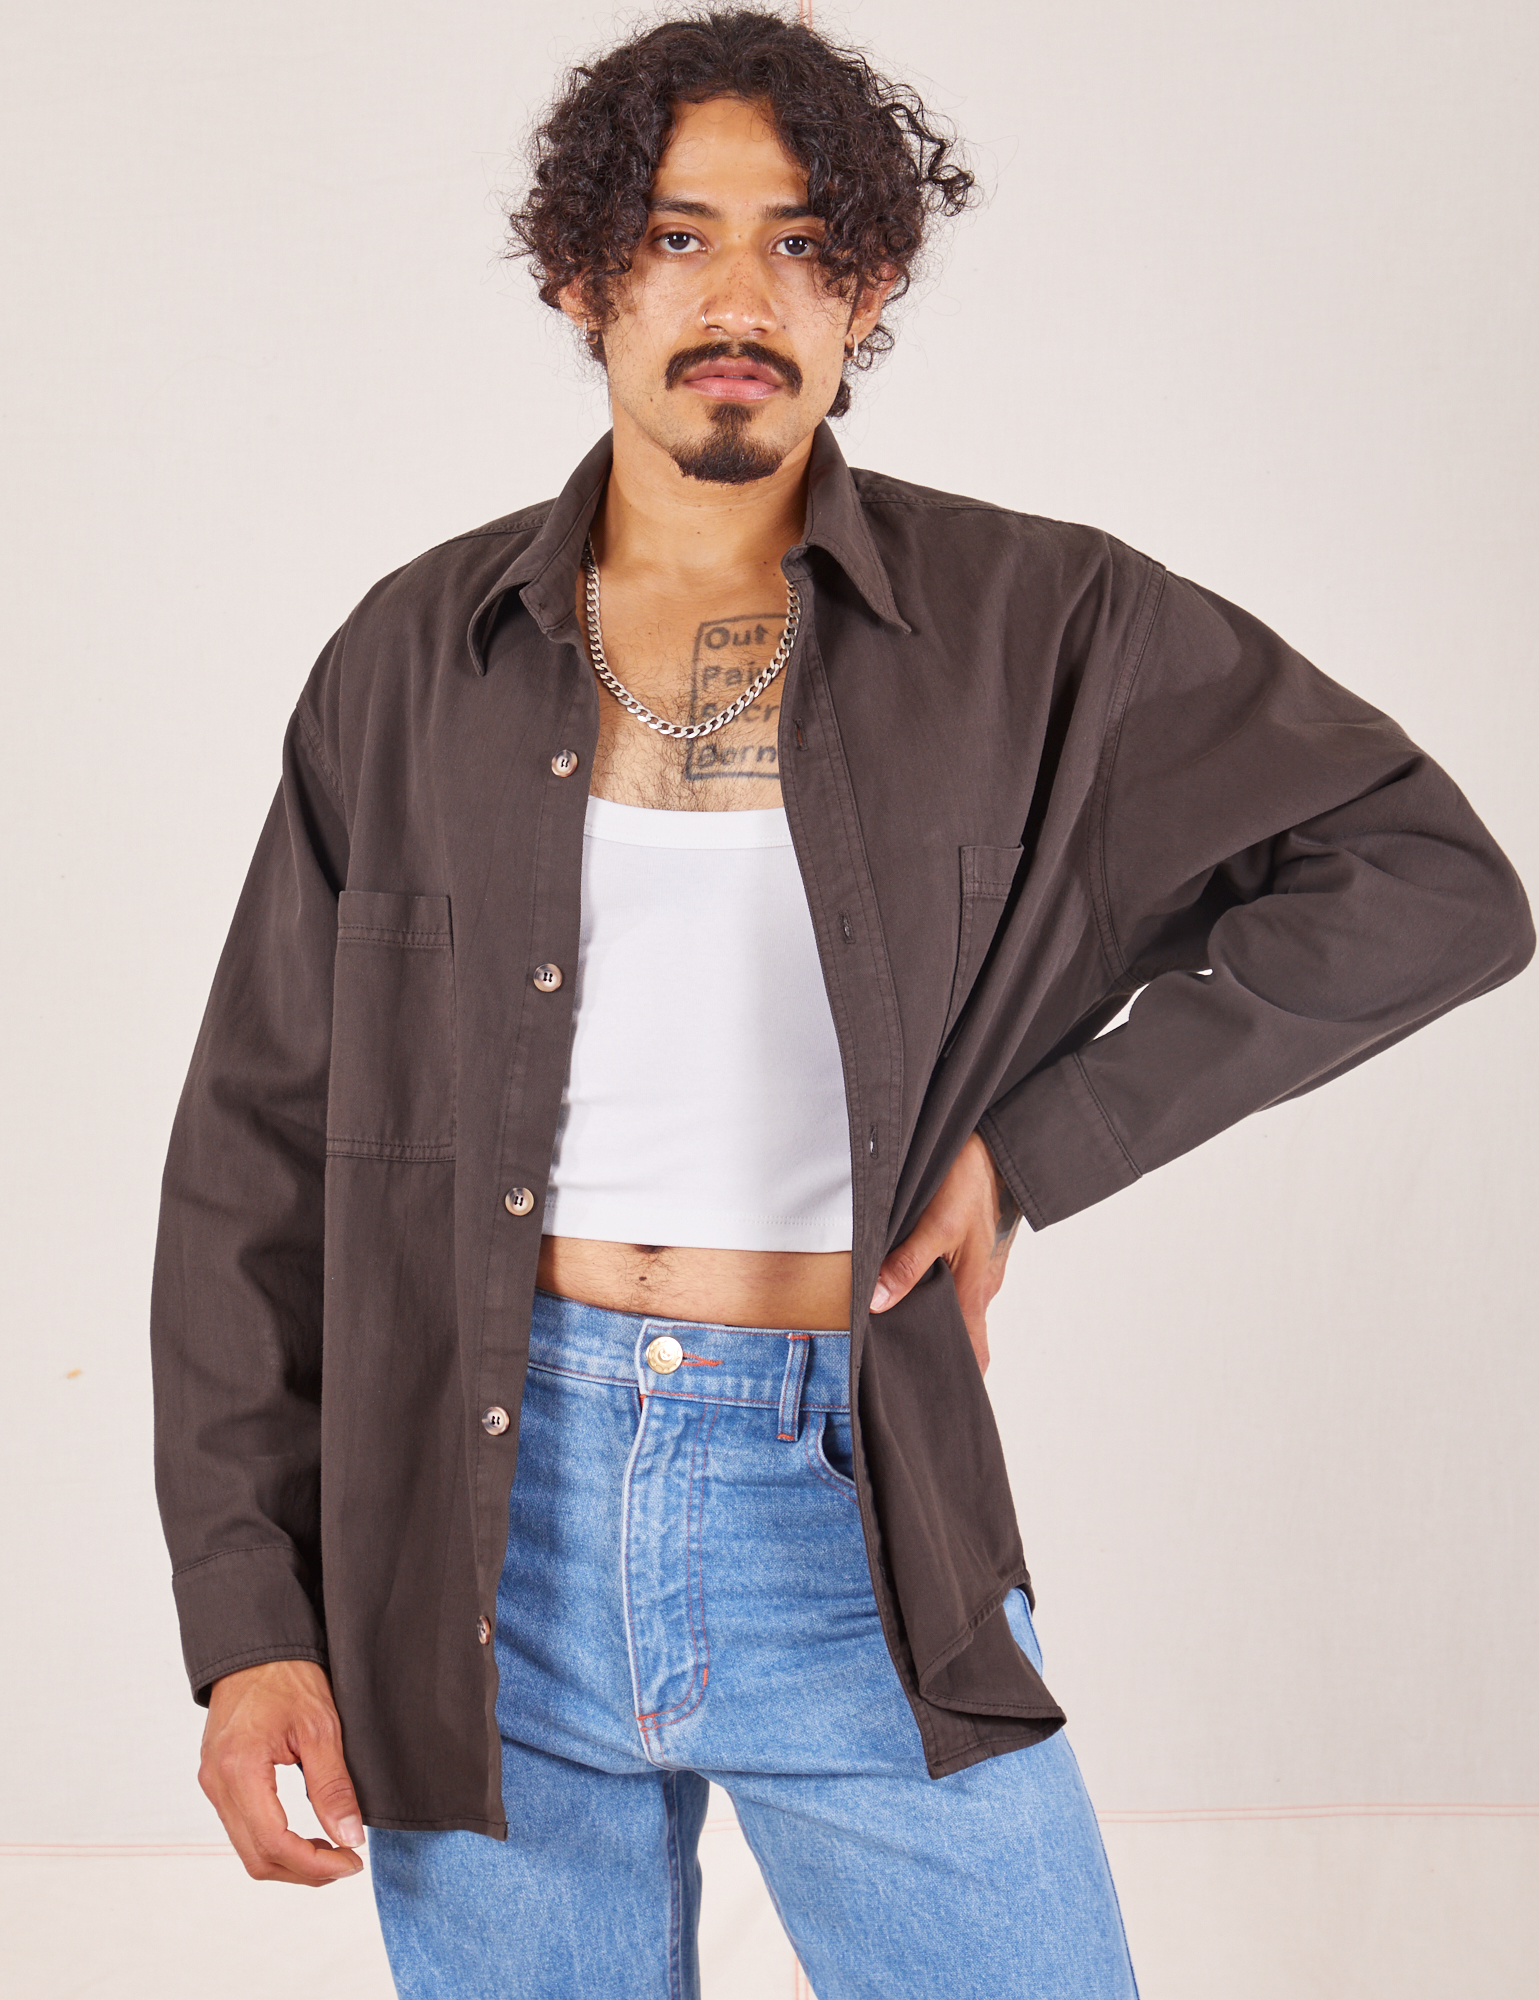 Jesse is wearing size S Oversize Overshirt in Espresso Brown and a vintage off-white Cropped Tank Top underneath